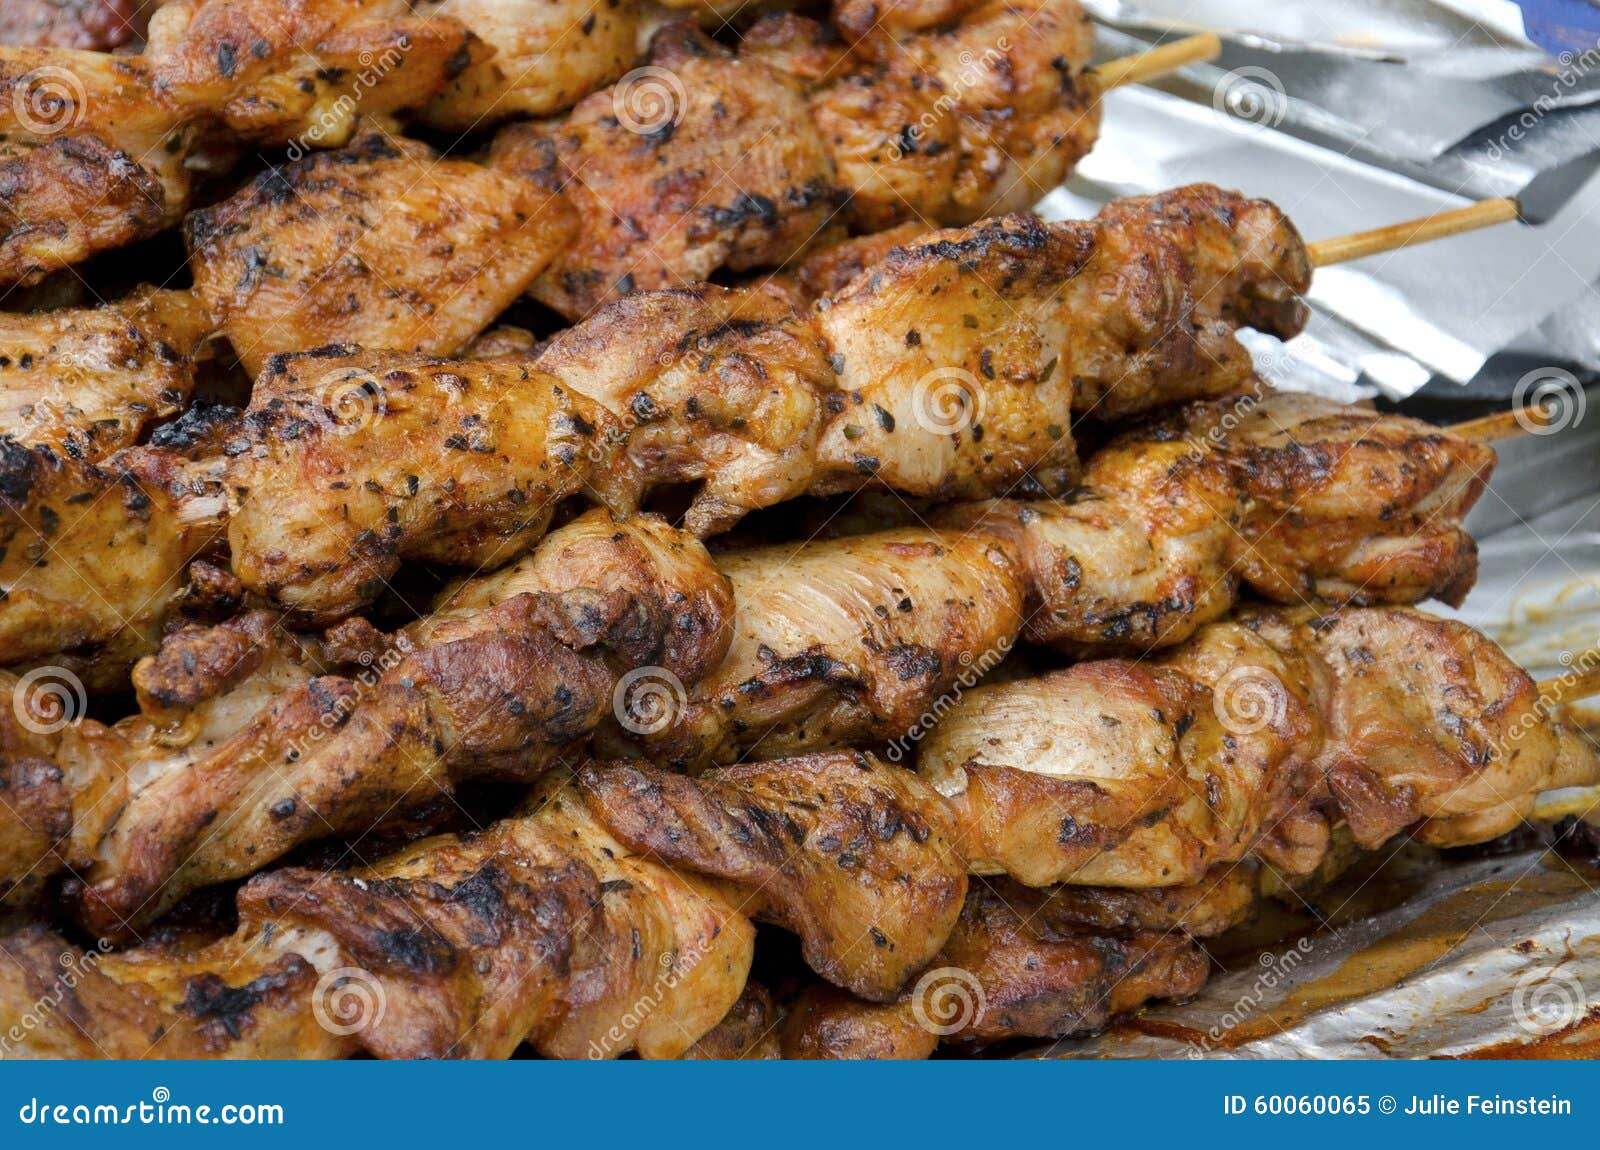 A pile of seasoned spicy grilled chicken on skewers.